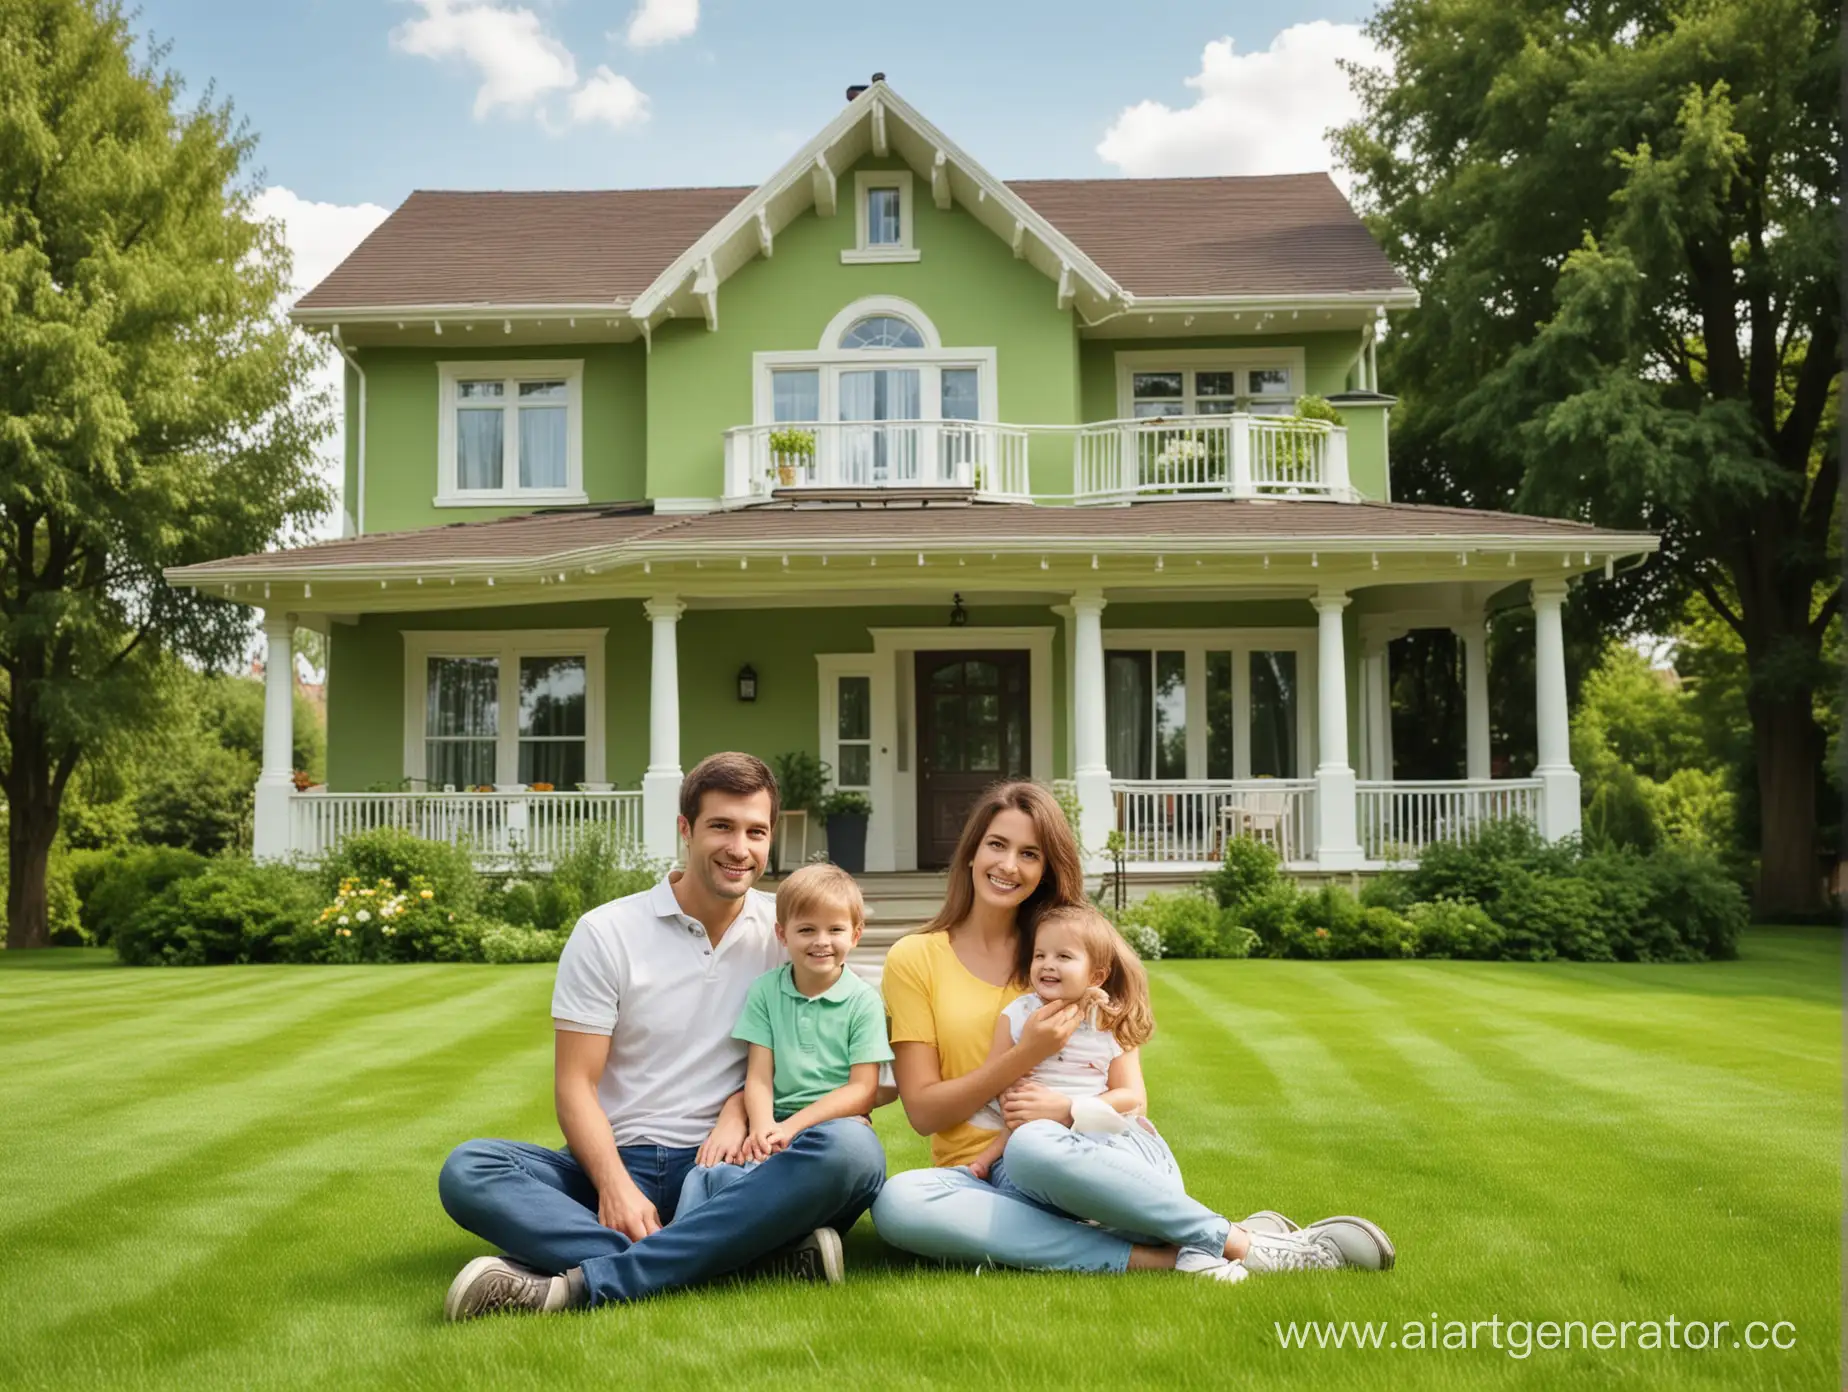 Happy-Family-Enjoying-Time-Together-in-Their-Spacious-Green-Garden-Home